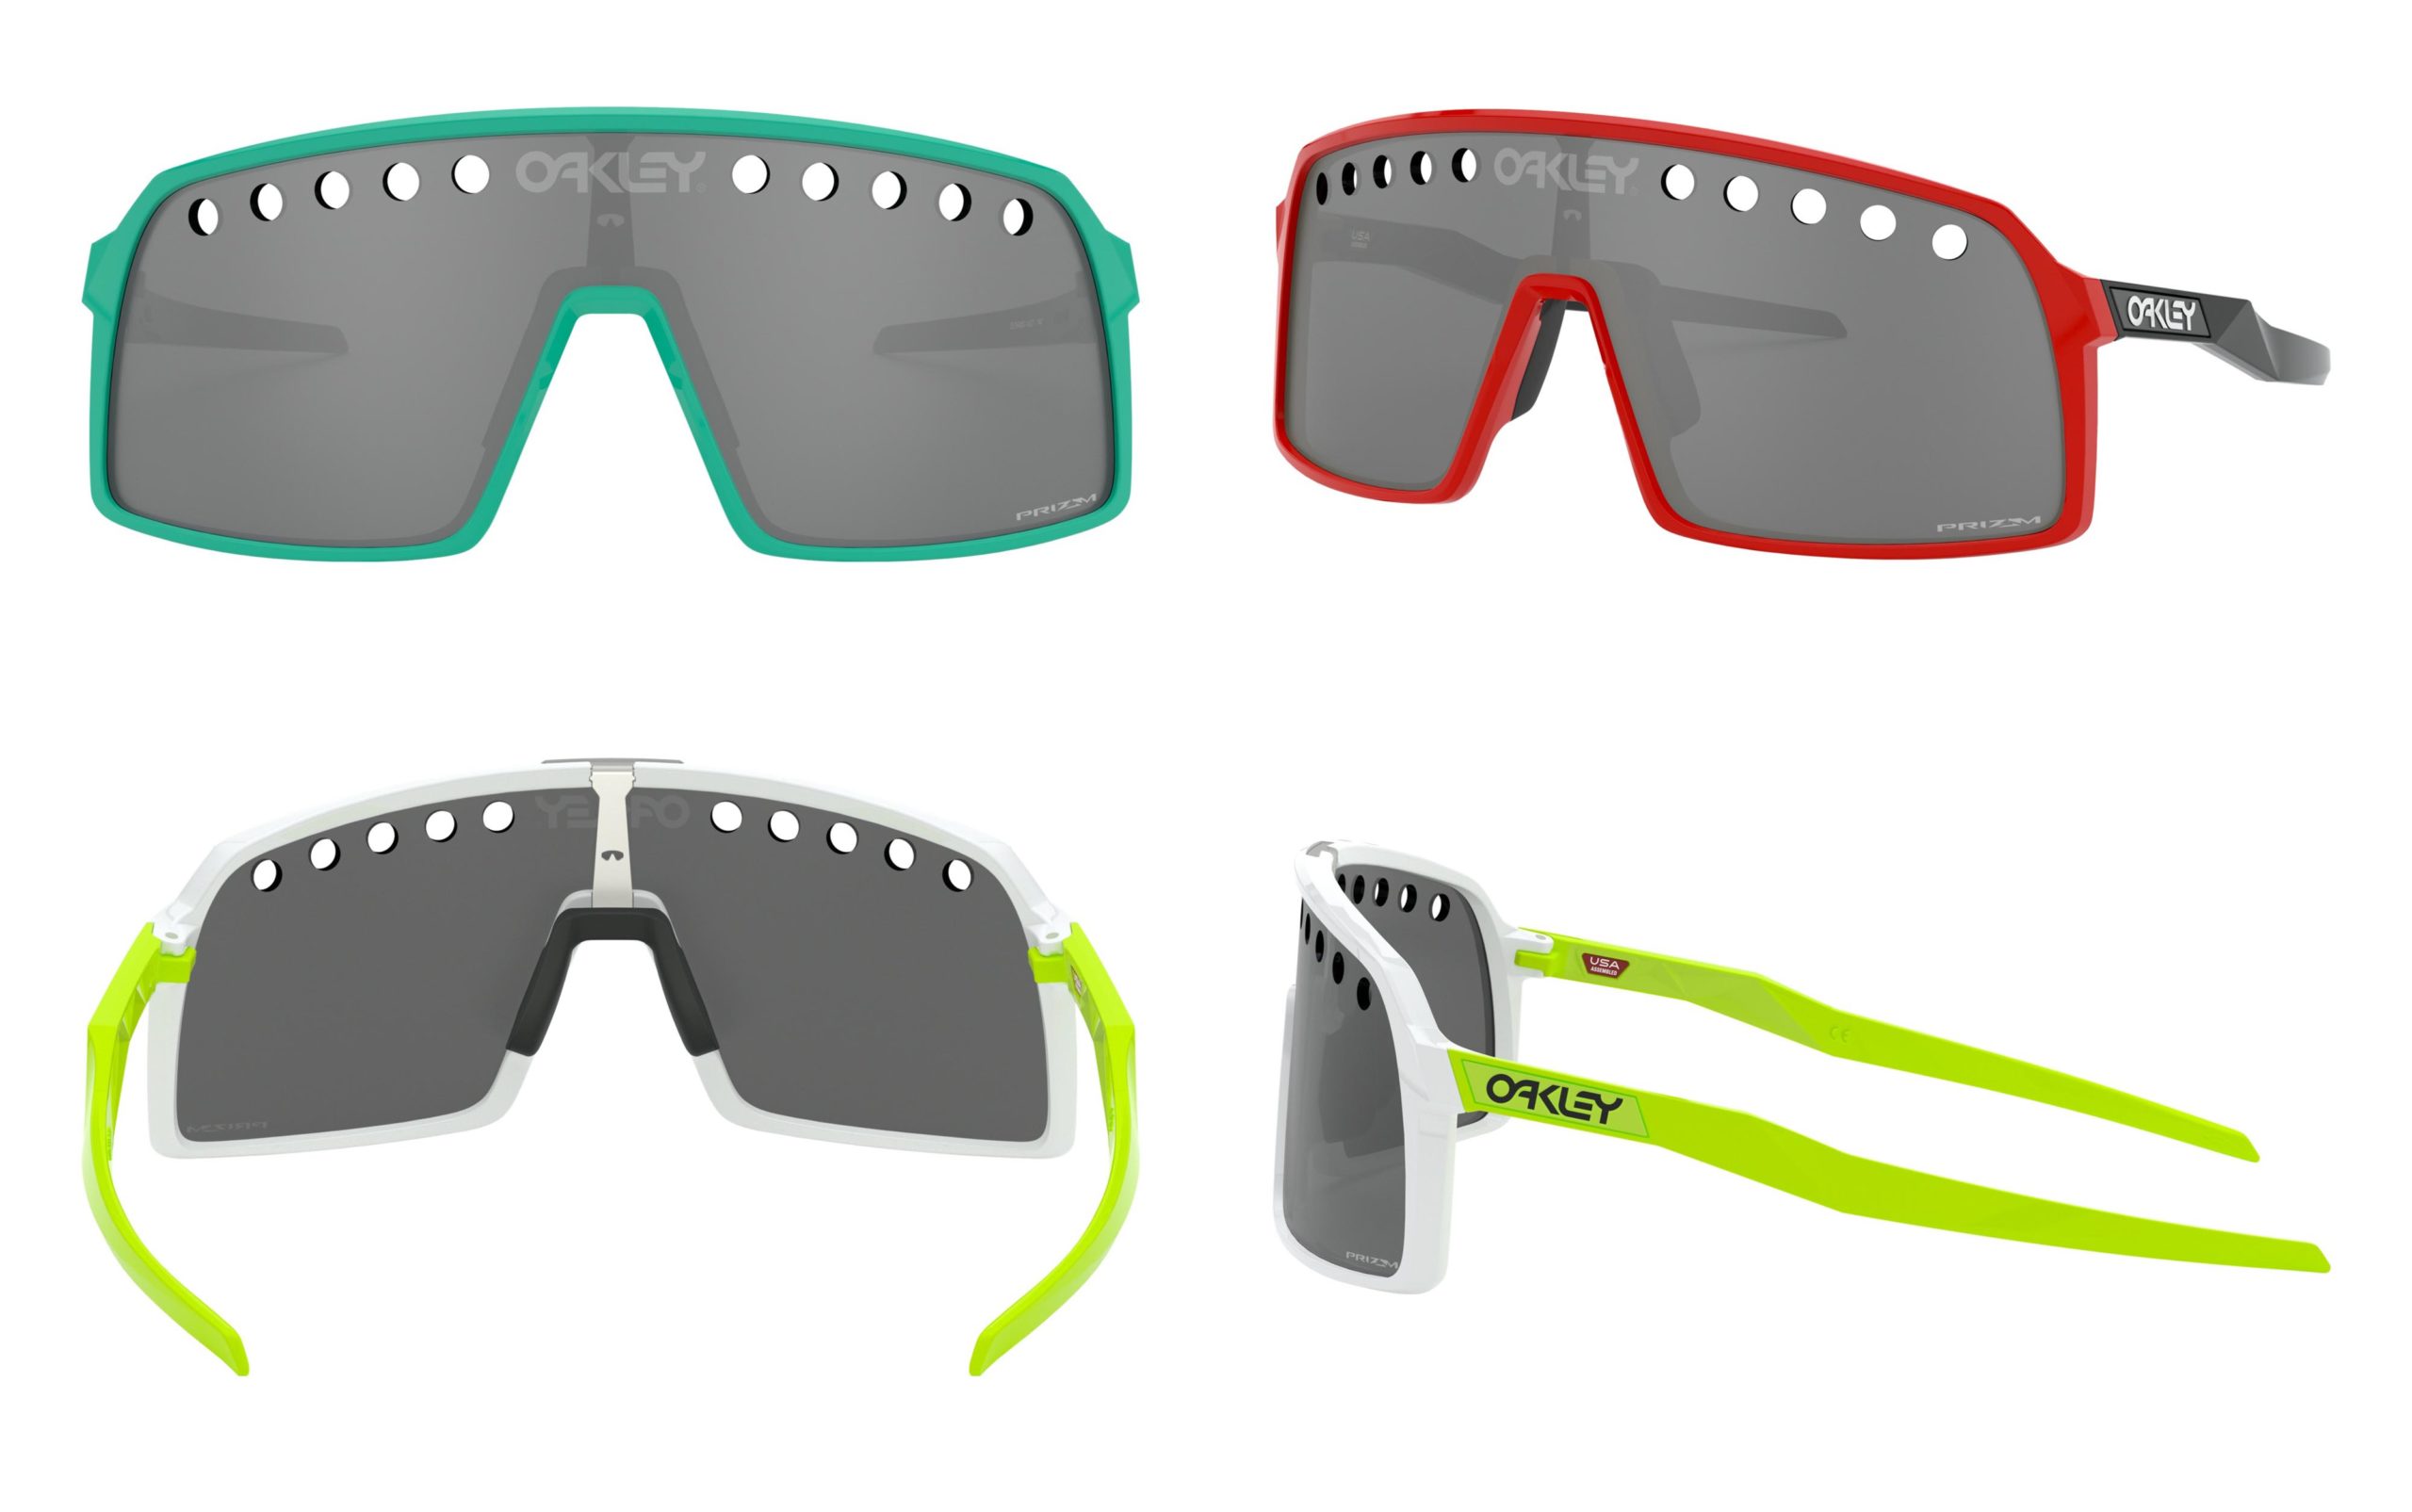 Oakley Origins Collection looks back w/ Limited Edition Sutro, Jawbreaker, and Frogskins